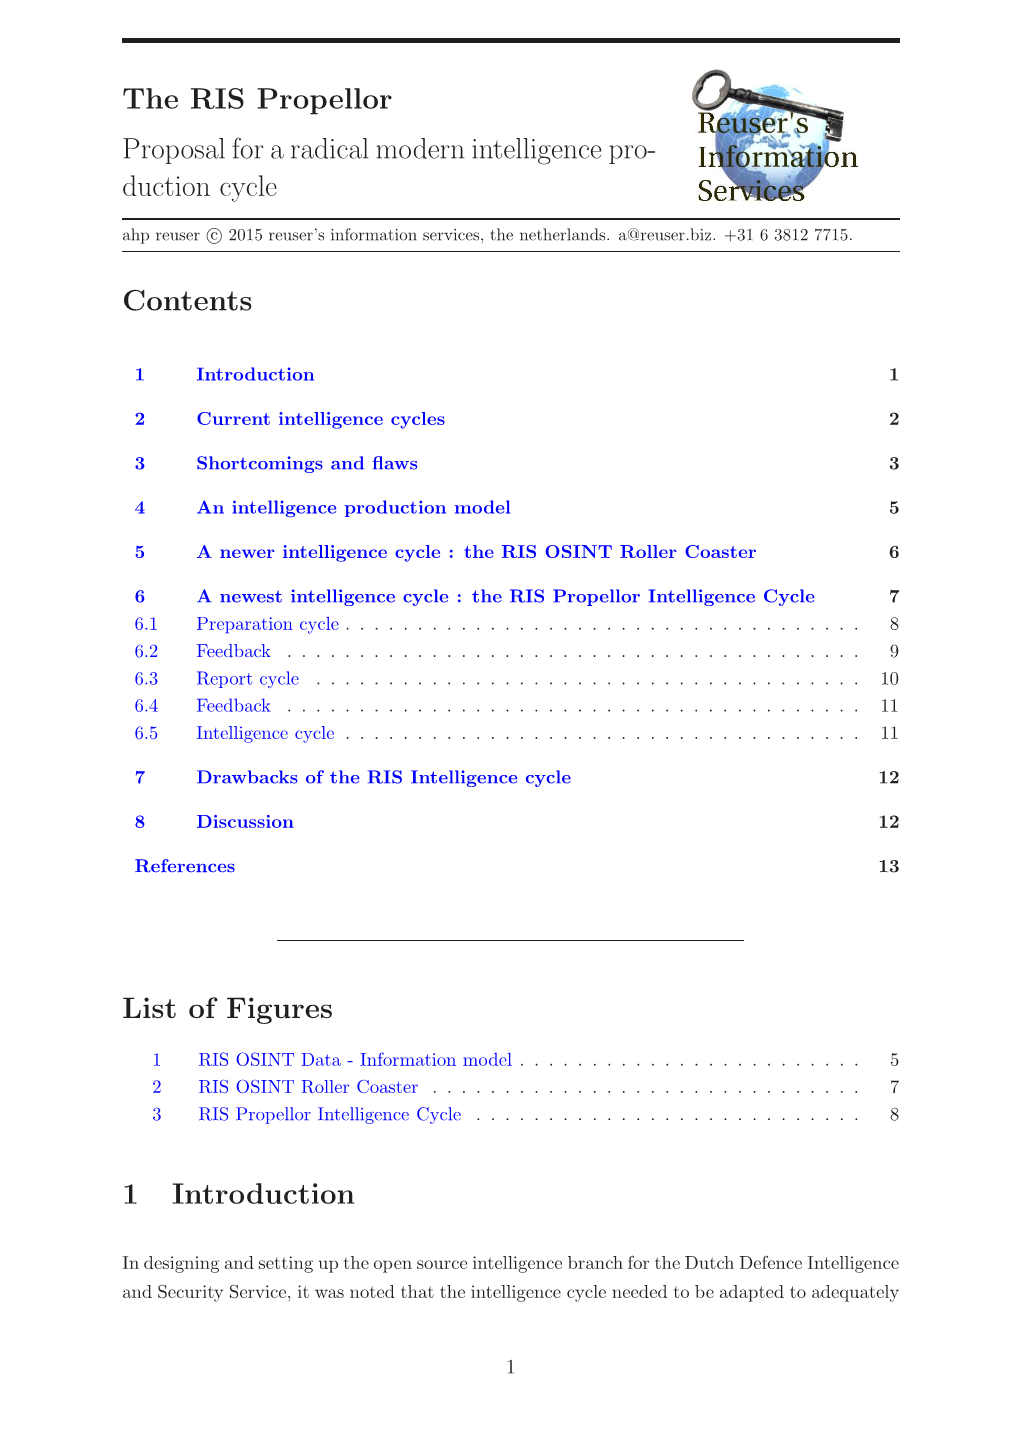 The RIS Propellor Proposal for a Radical Modern Intelligence Pro- Duction Cycle Contents List of Figures 1 Introduction